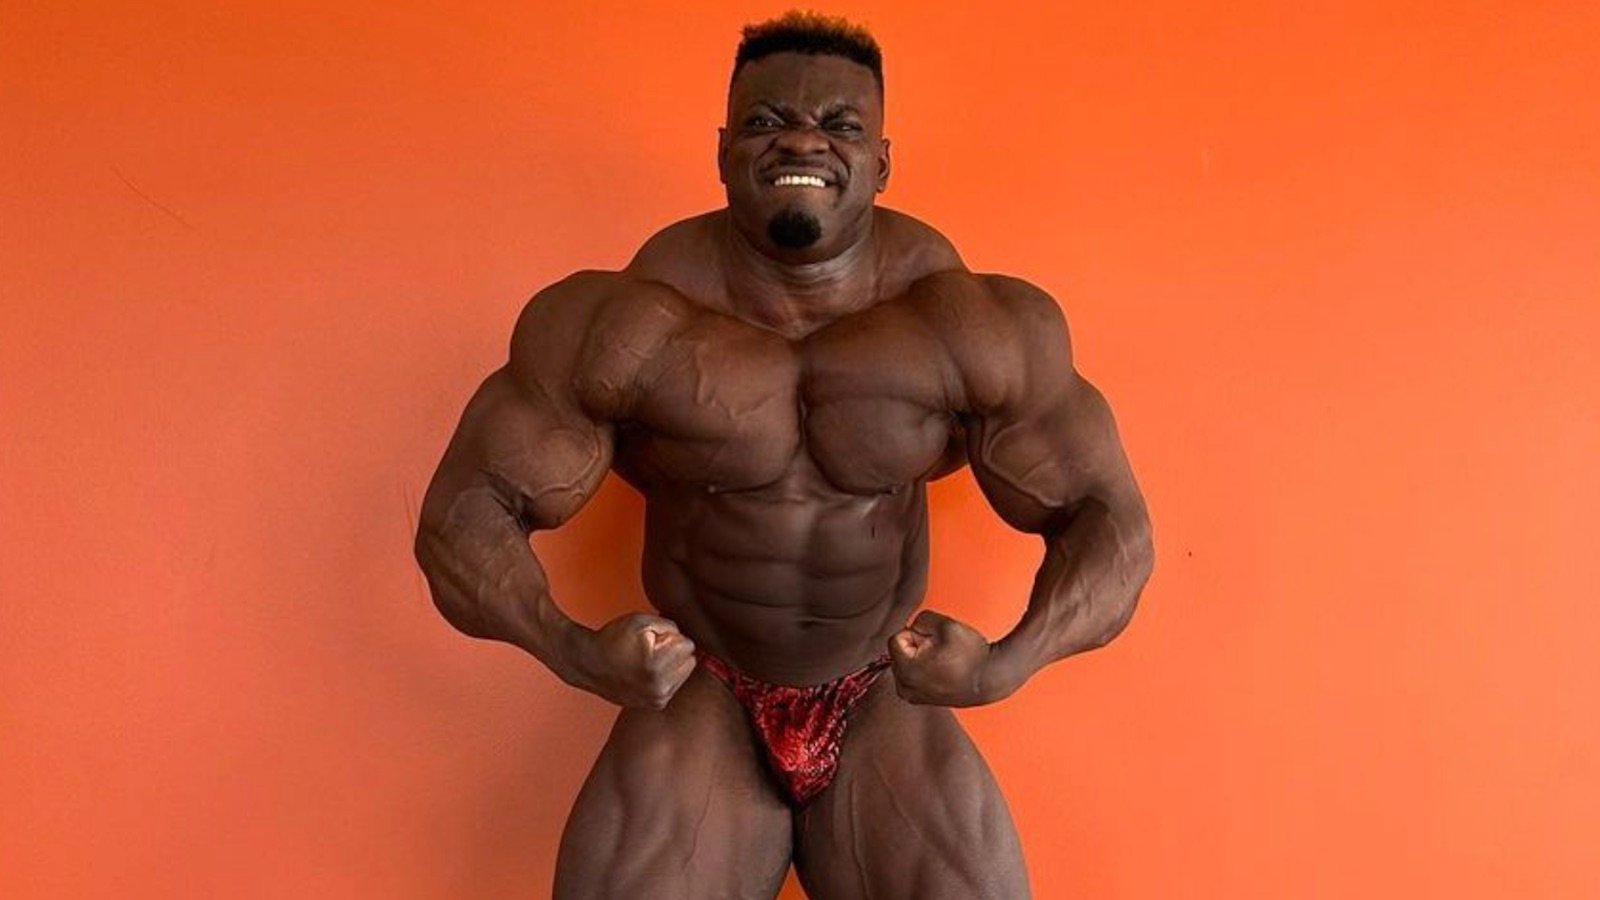 blessing-awodibu-reflected-on-his-disappointing-2023-chicago-pro-performance-–-breaking-muscle